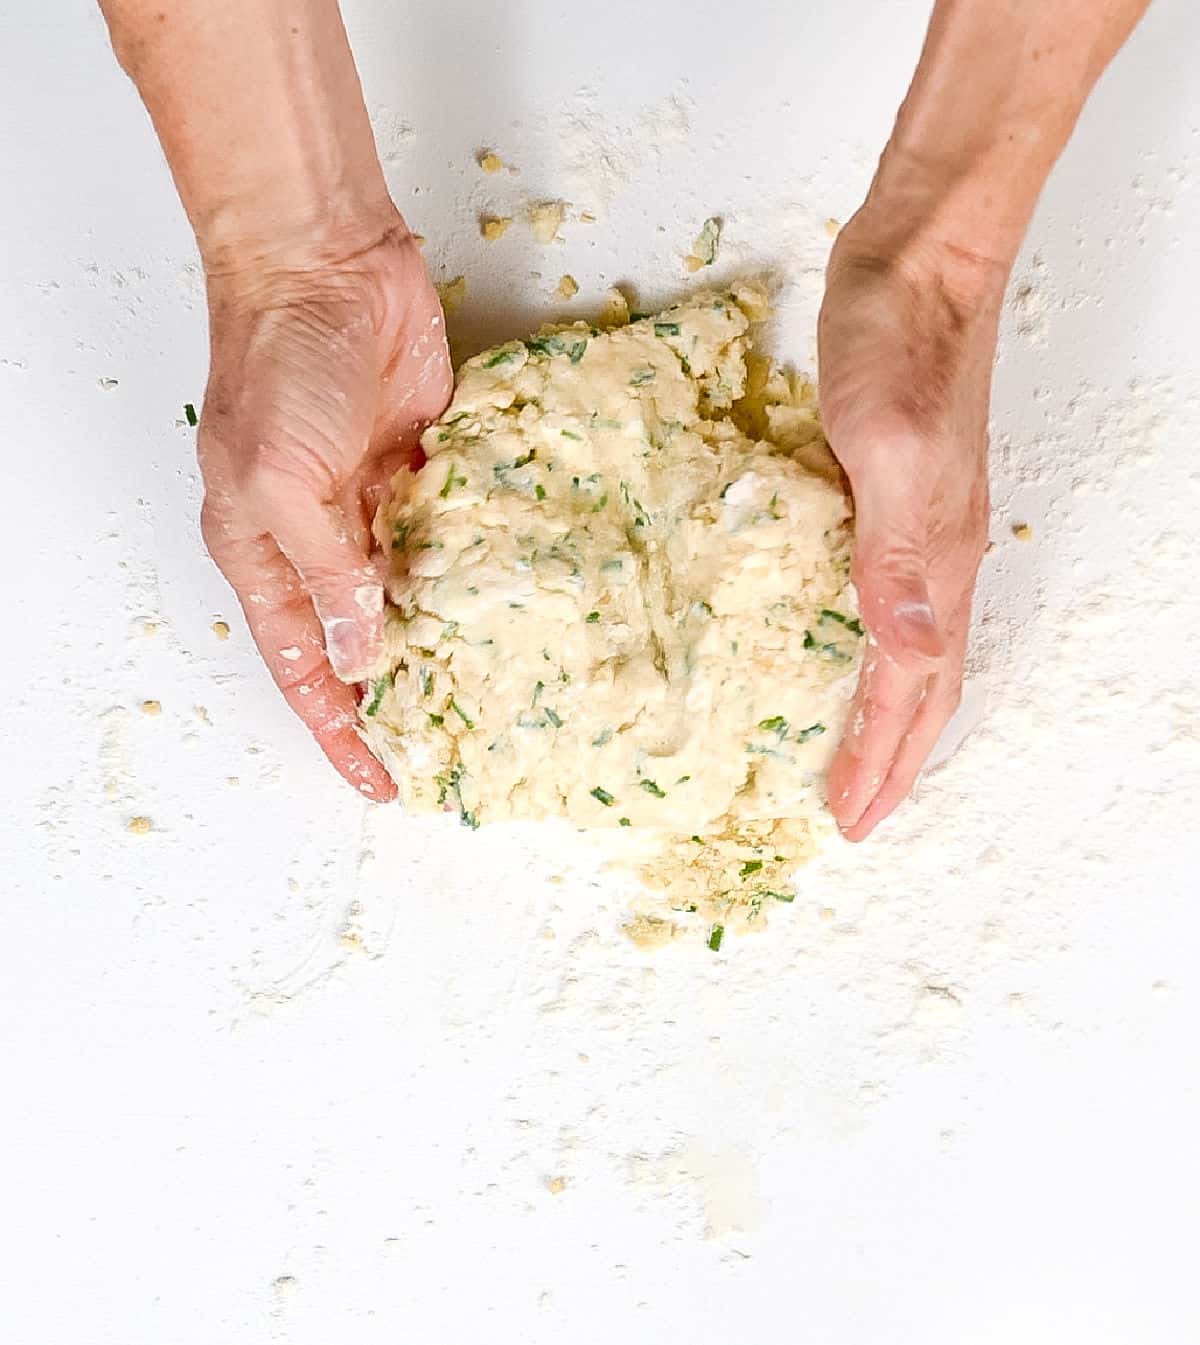 Gathering chive scone dough on a white surface.